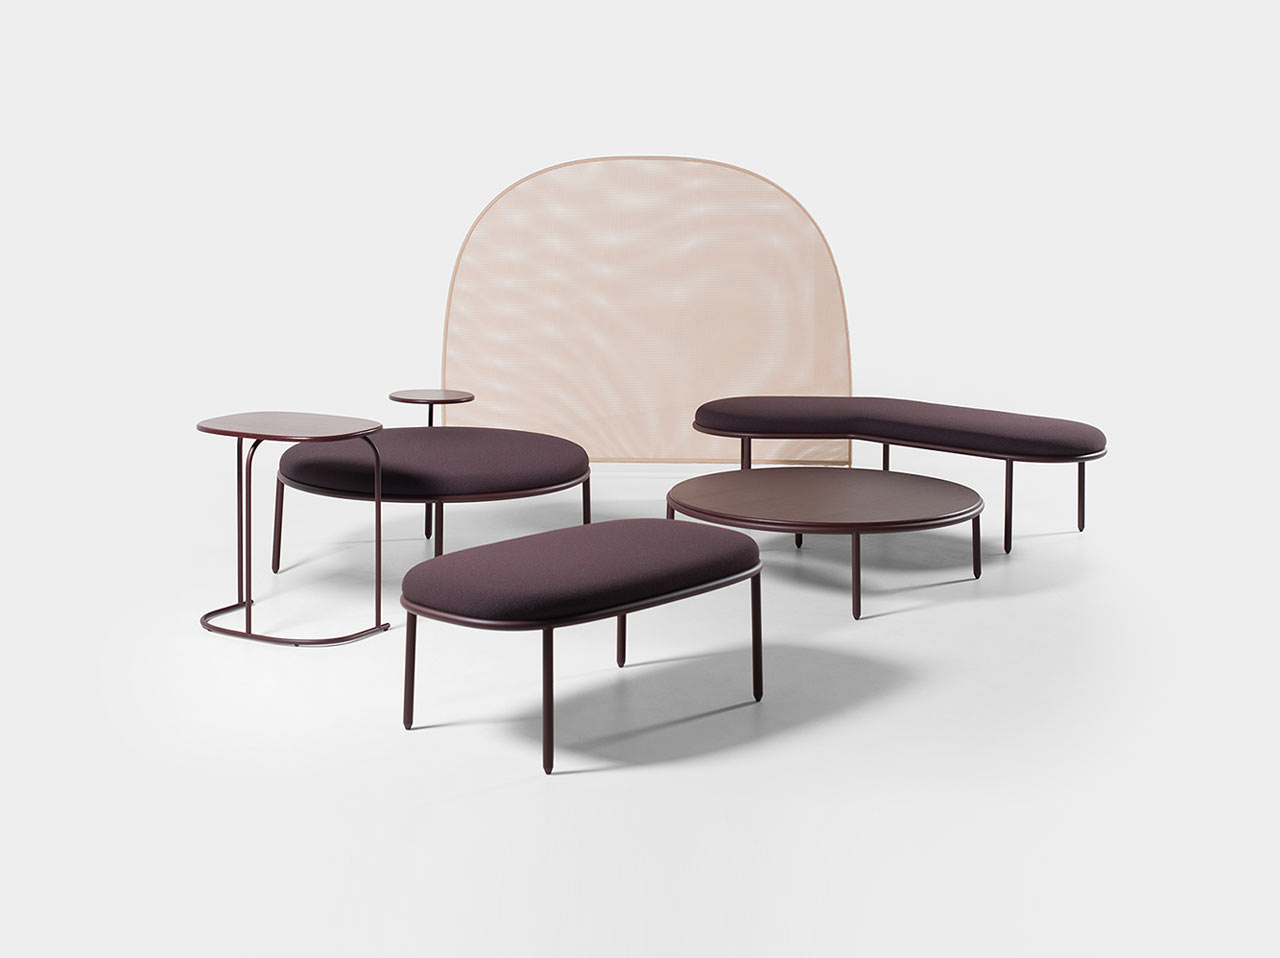 Mitab Launches Campfire Furniture Family from Note Design Studio